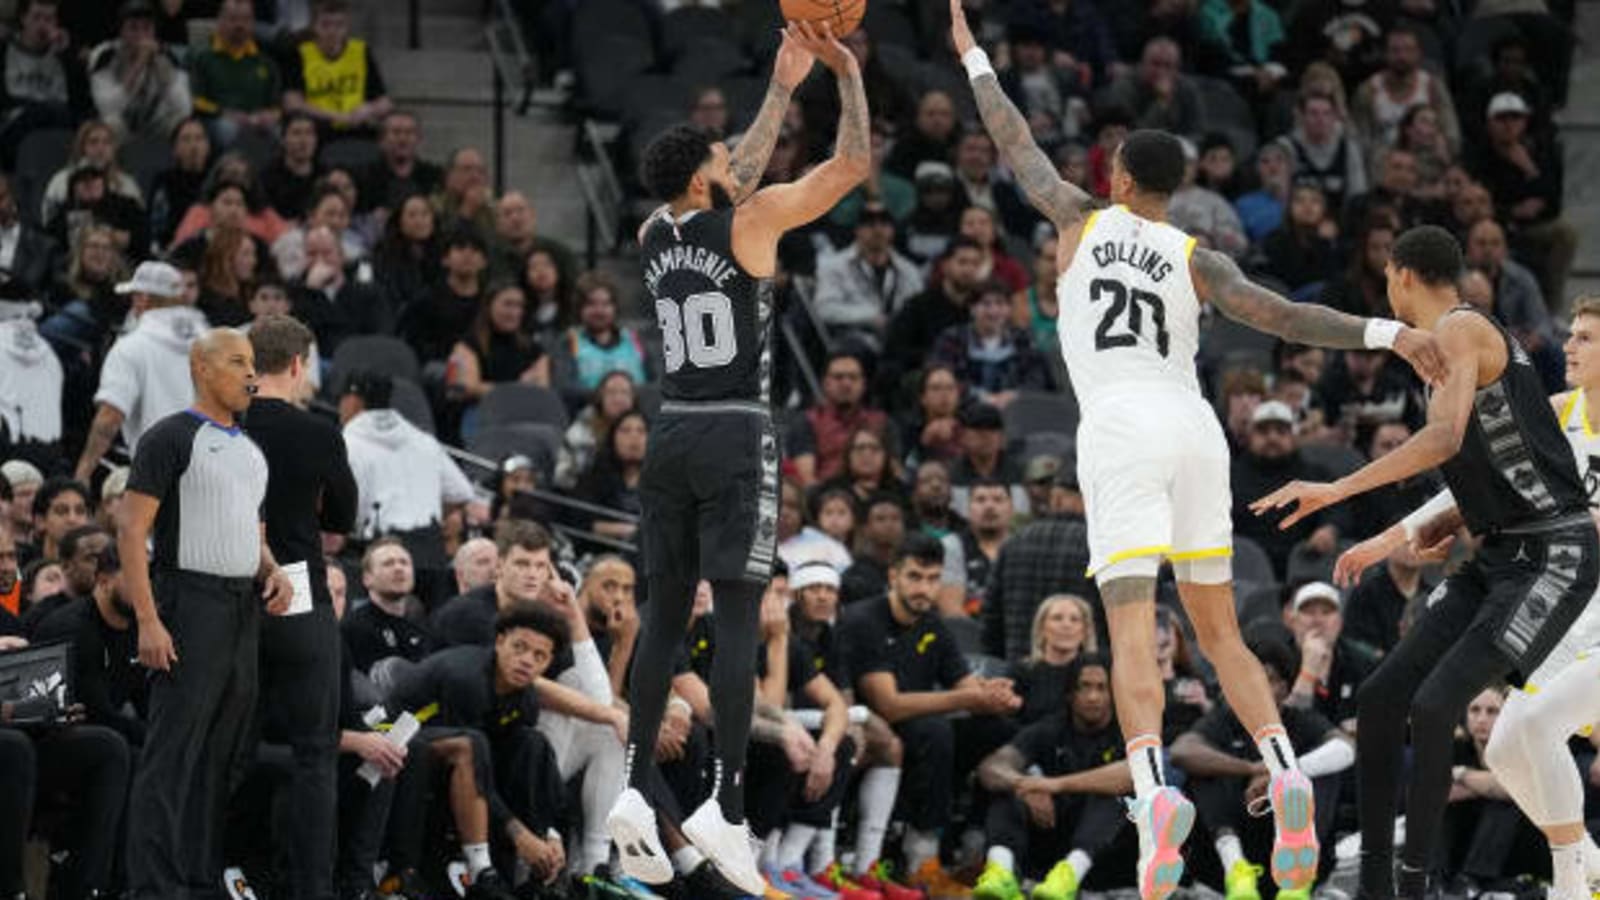 Champagnie Starts Hot But Spurs Fall Flat, Lose 5th Straight vs. Jazz